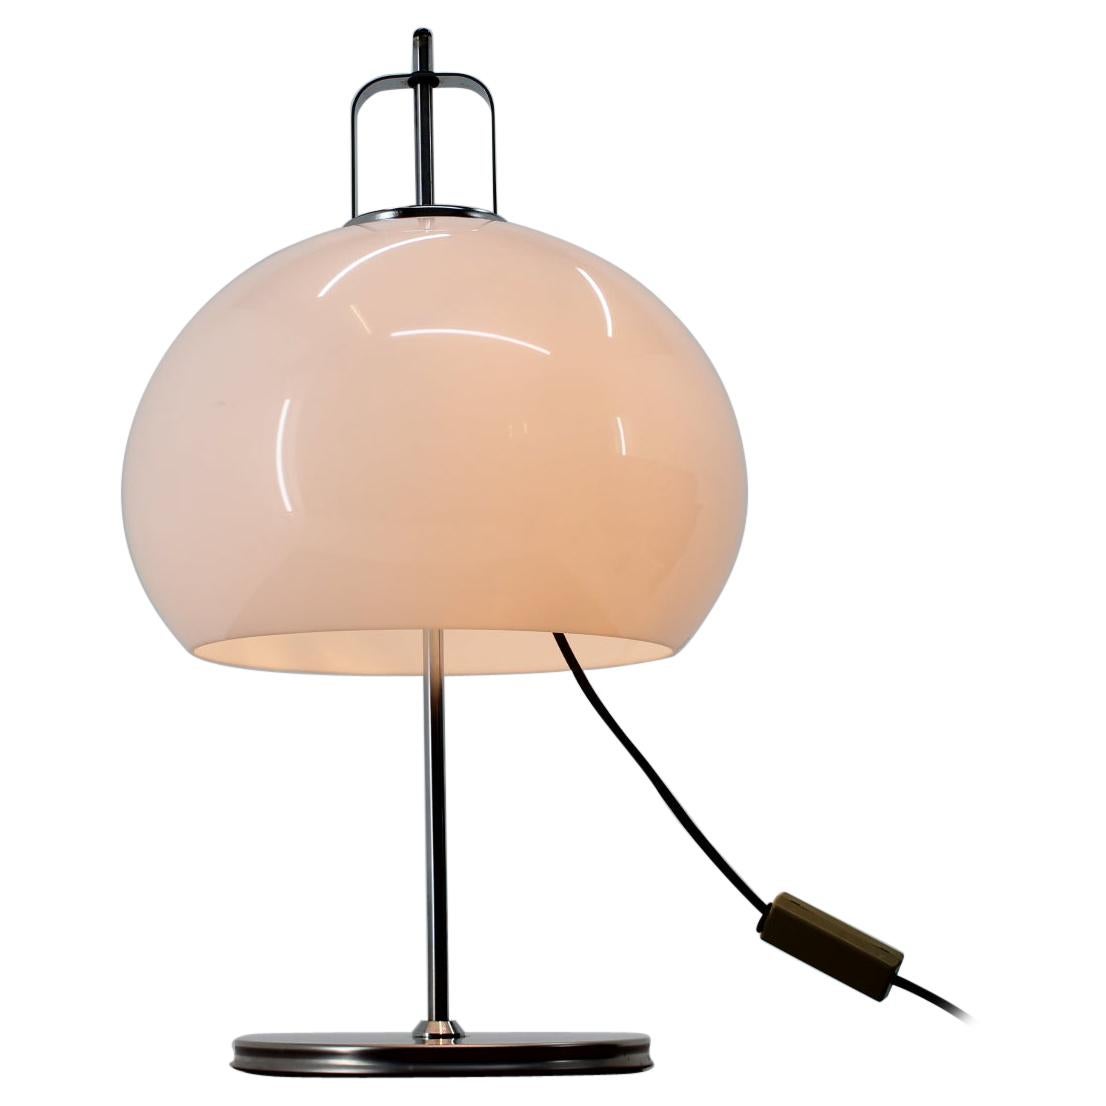 Big Midcentury Table Lamp by Meblo Designed by Harvey Guzzini, Italy, 1970s